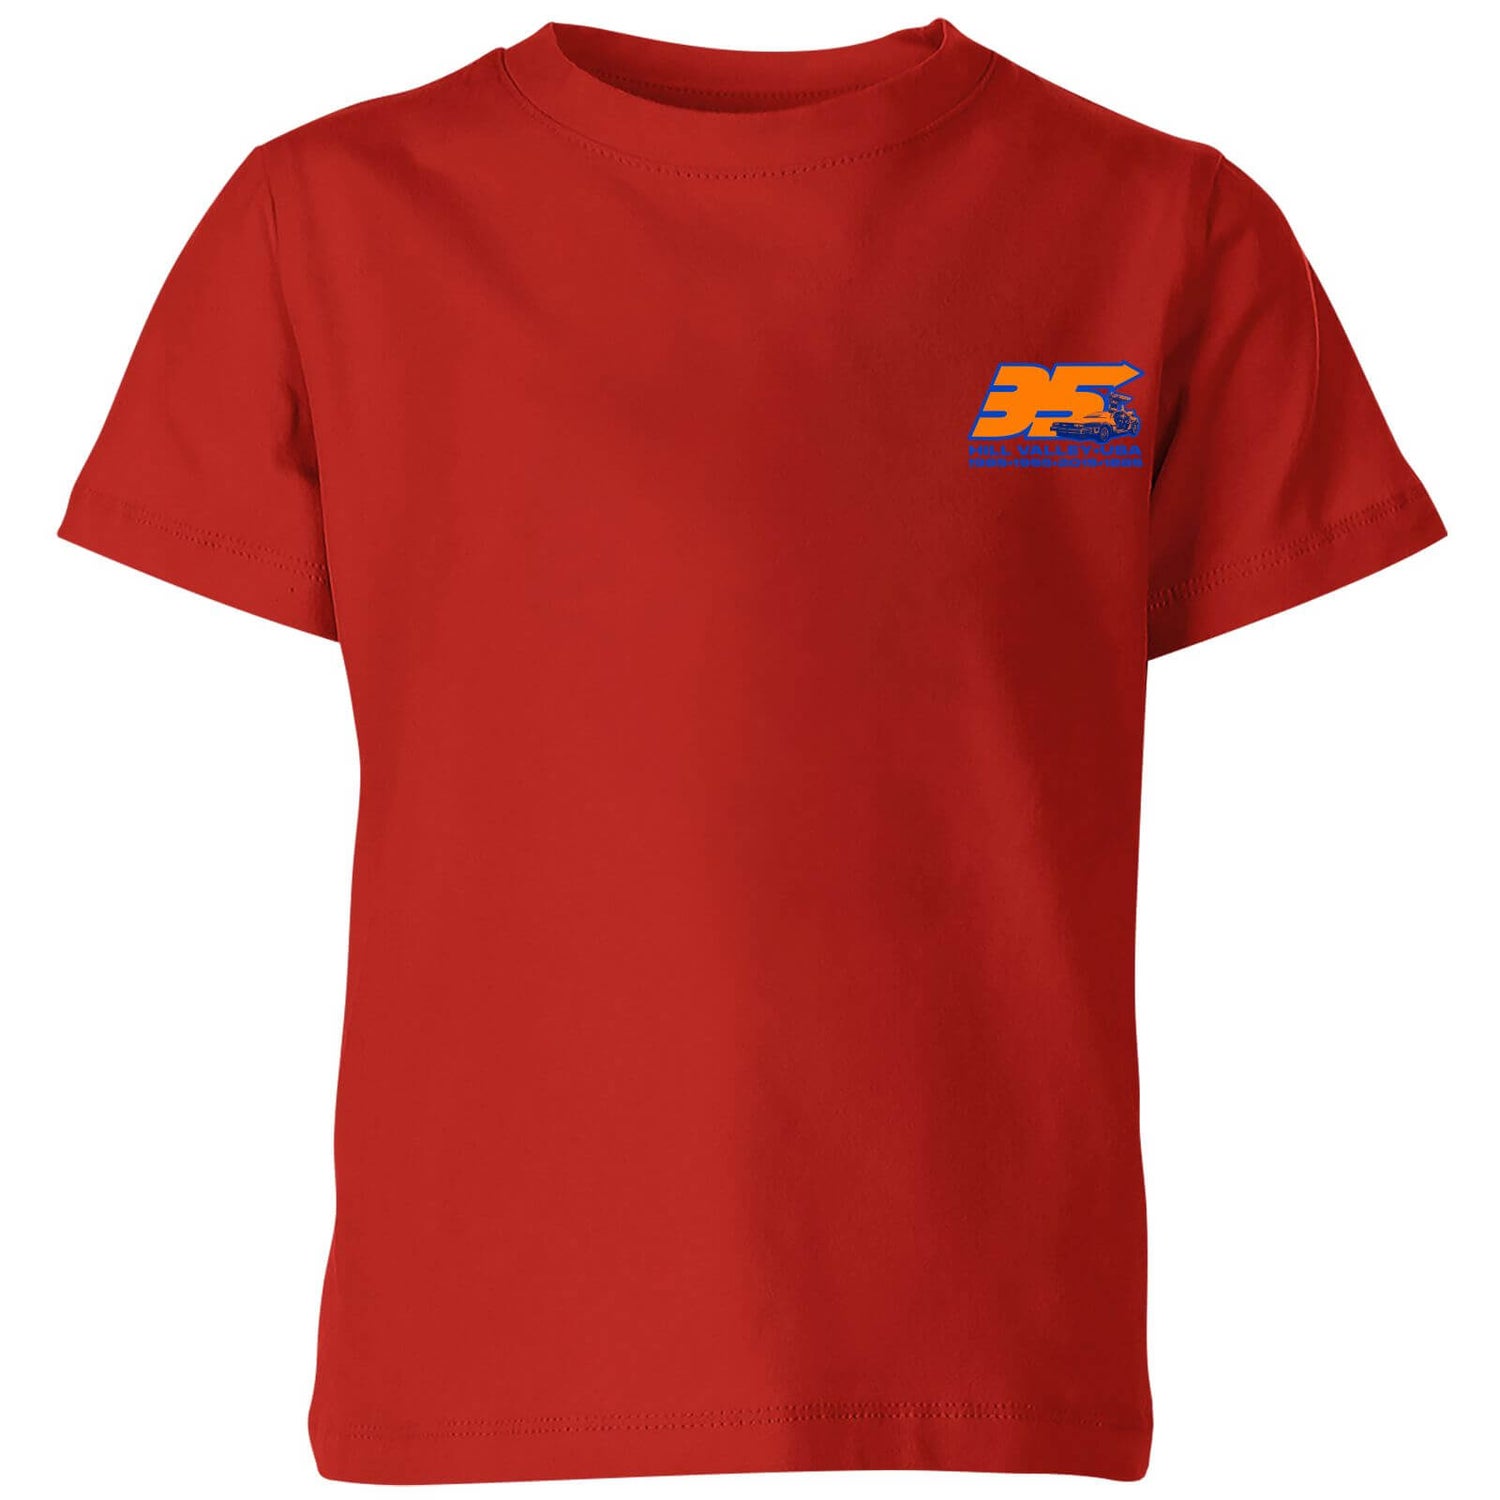 Back To The Future 35 Hill Valley Front Kids' T-Shirt - Red